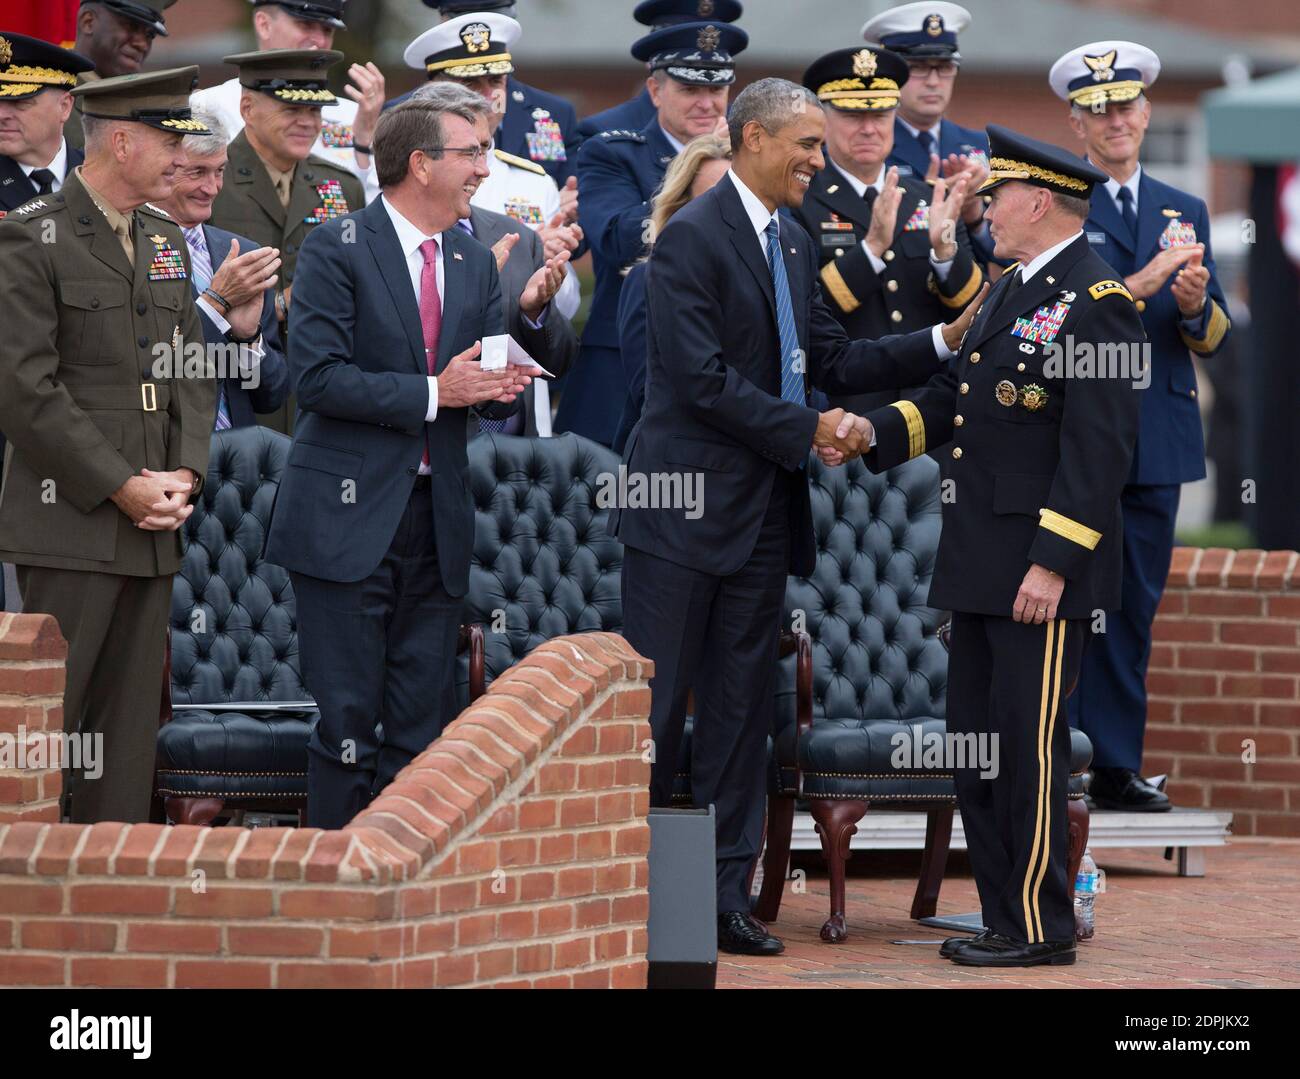 General Joseph Dunford, Defense Secretary Ashton Carter, and US President Barack Obama applaud General Martin Dempsey(right) at his retirement party at Fort Myer, Virginia, September 25, 2015. Photo by Chris Kleponis /Pool/ABACAPRESS.COM Stock Photo